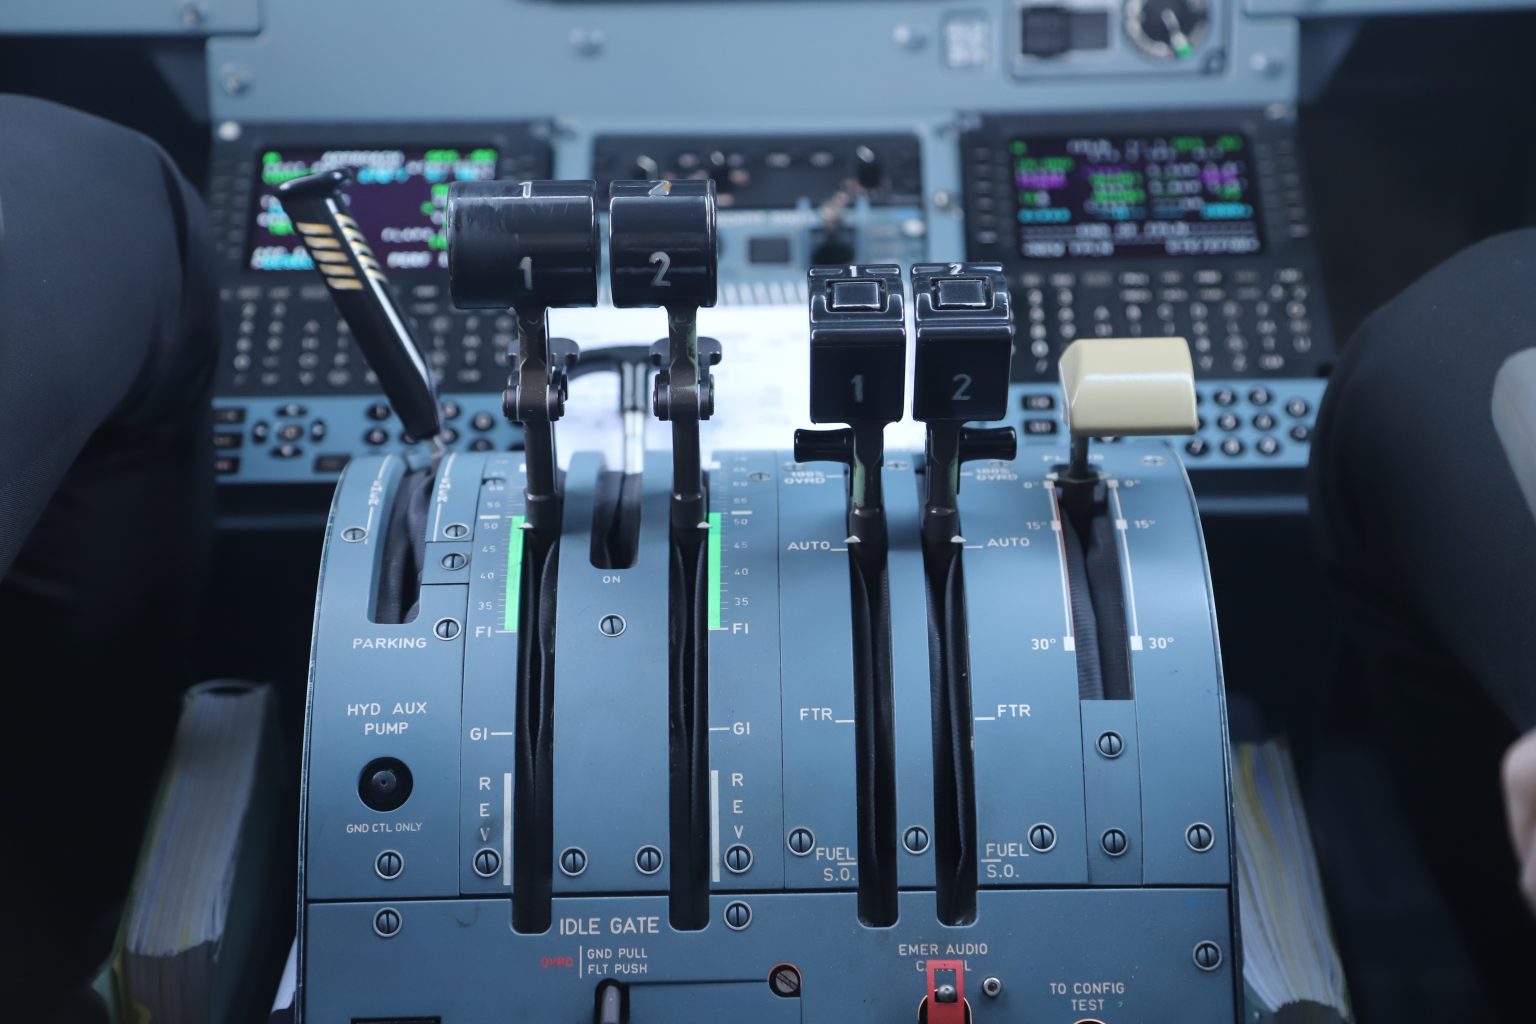 Power_and_Condition_levers_of_ATR72-1536x1024.jpg